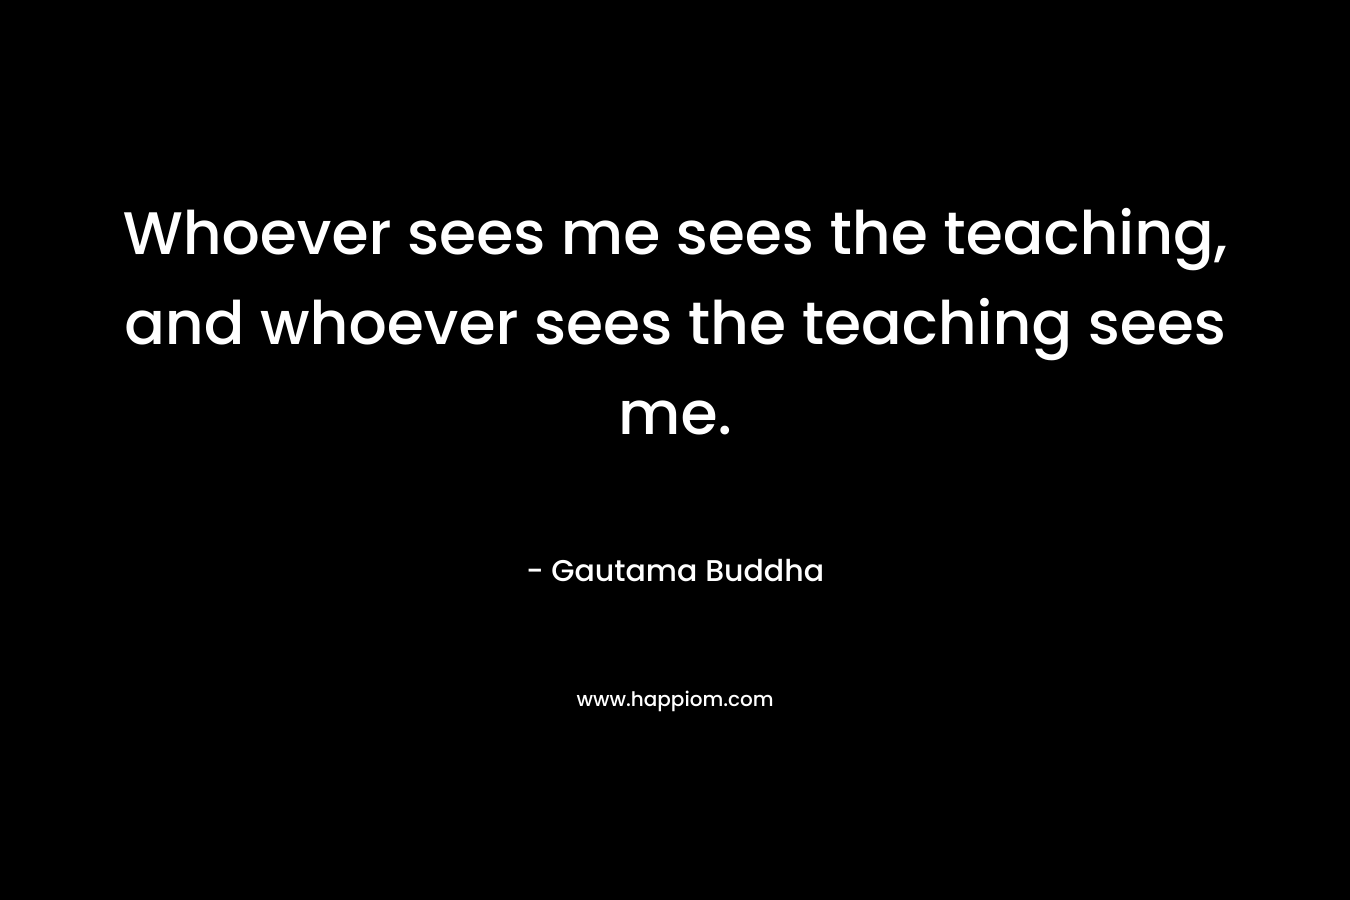 Whoever sees me sees the teaching, and whoever sees the teaching sees me.